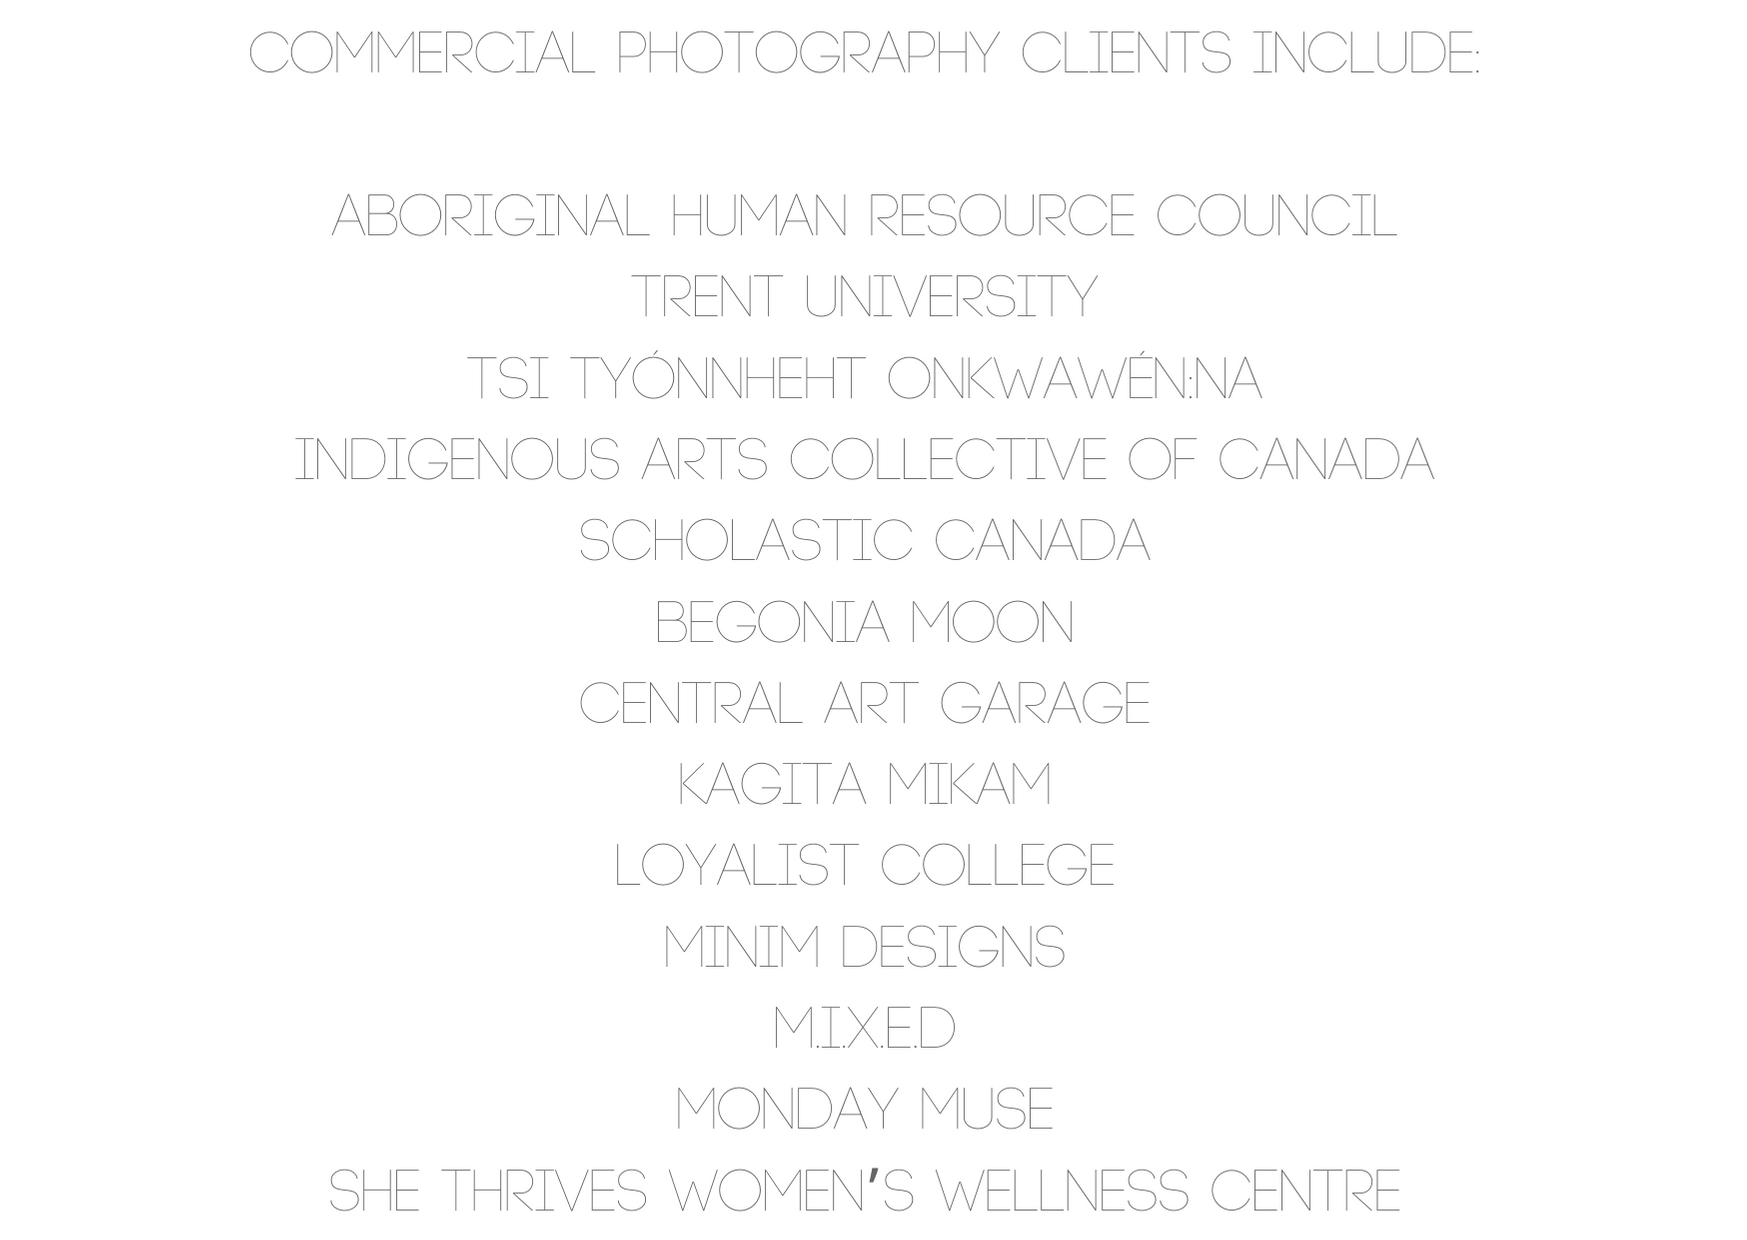 commercial photography clients include_Begonia Mooncentral art garageinclusion works Aboriginal Human Resource CouncilKagita MikamMIXEDMonday MuseShe Thrives women’s wellness centreiHuman.png